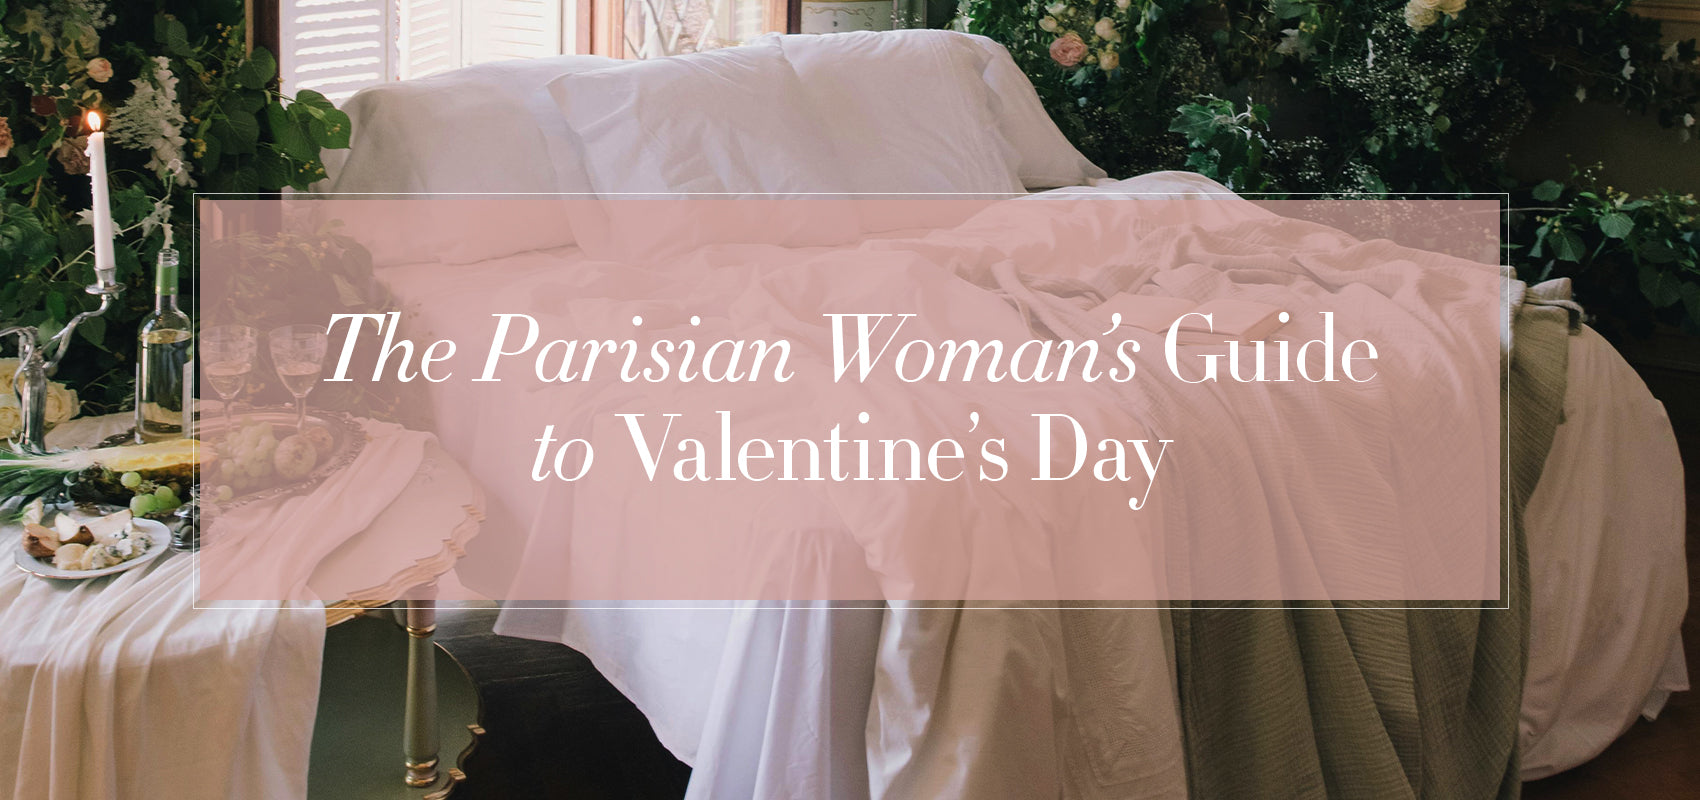 The Parisian Woman’s Guide to Valentine’s Day